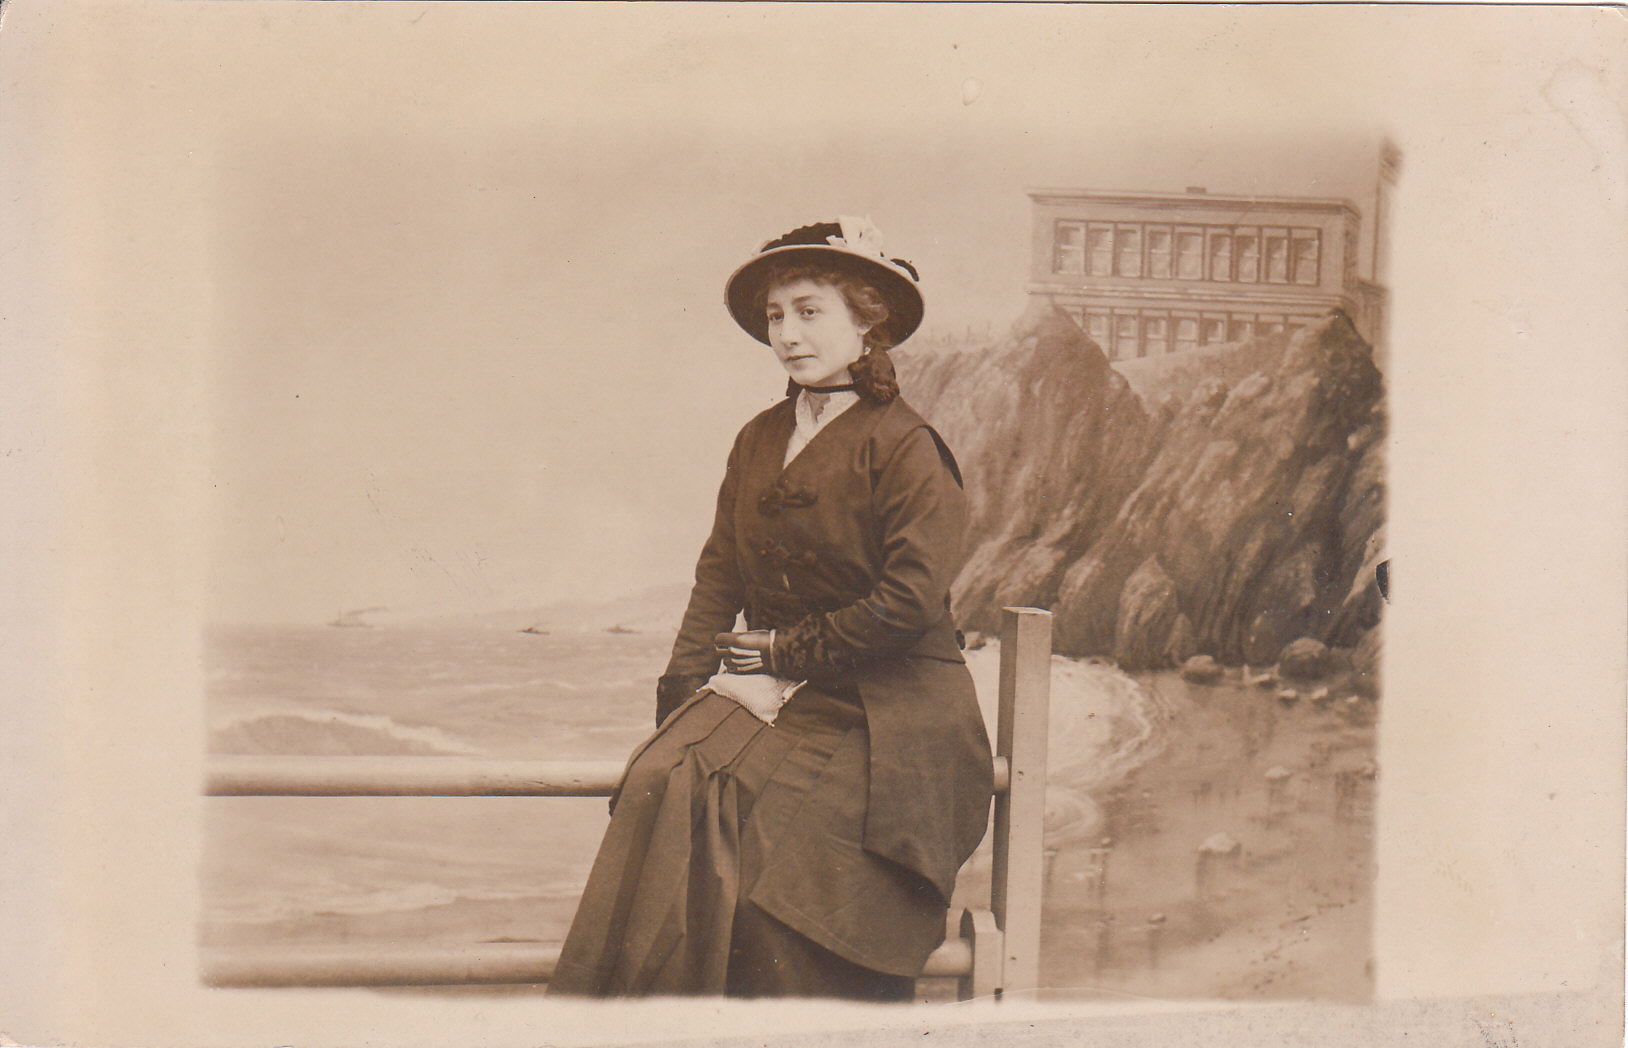 old po of woman sitting on a ledge overlooking water